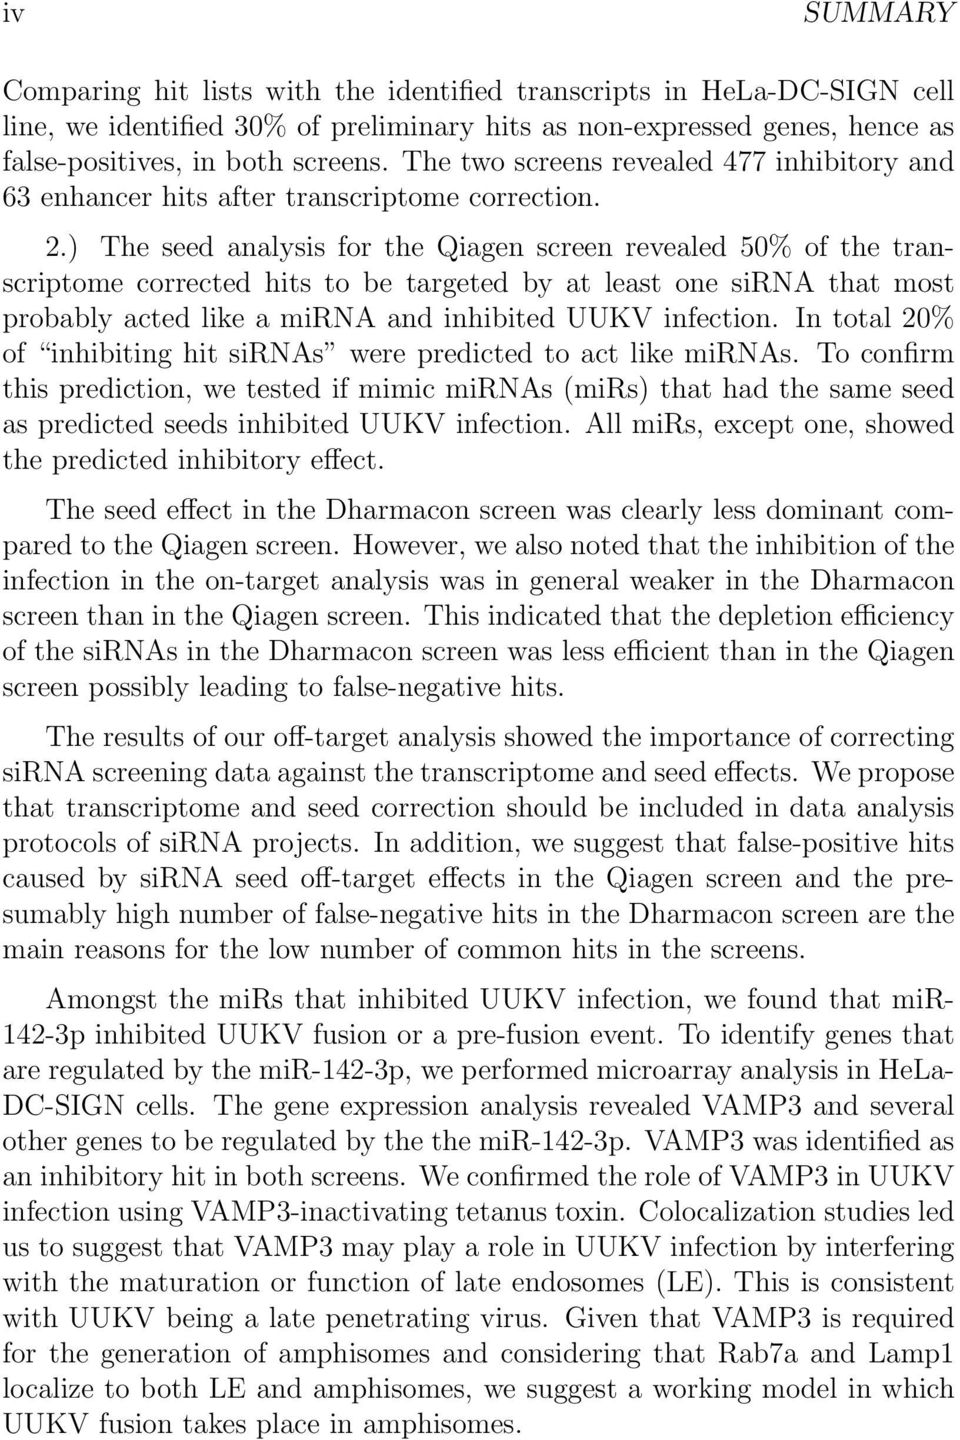 ) The seed analysis for the Qiagen screen revealed 50% of the transcriptome corrected hits to be targeted by at least one sirna that most probably acted like a mirna and inhibited UUKV infection.